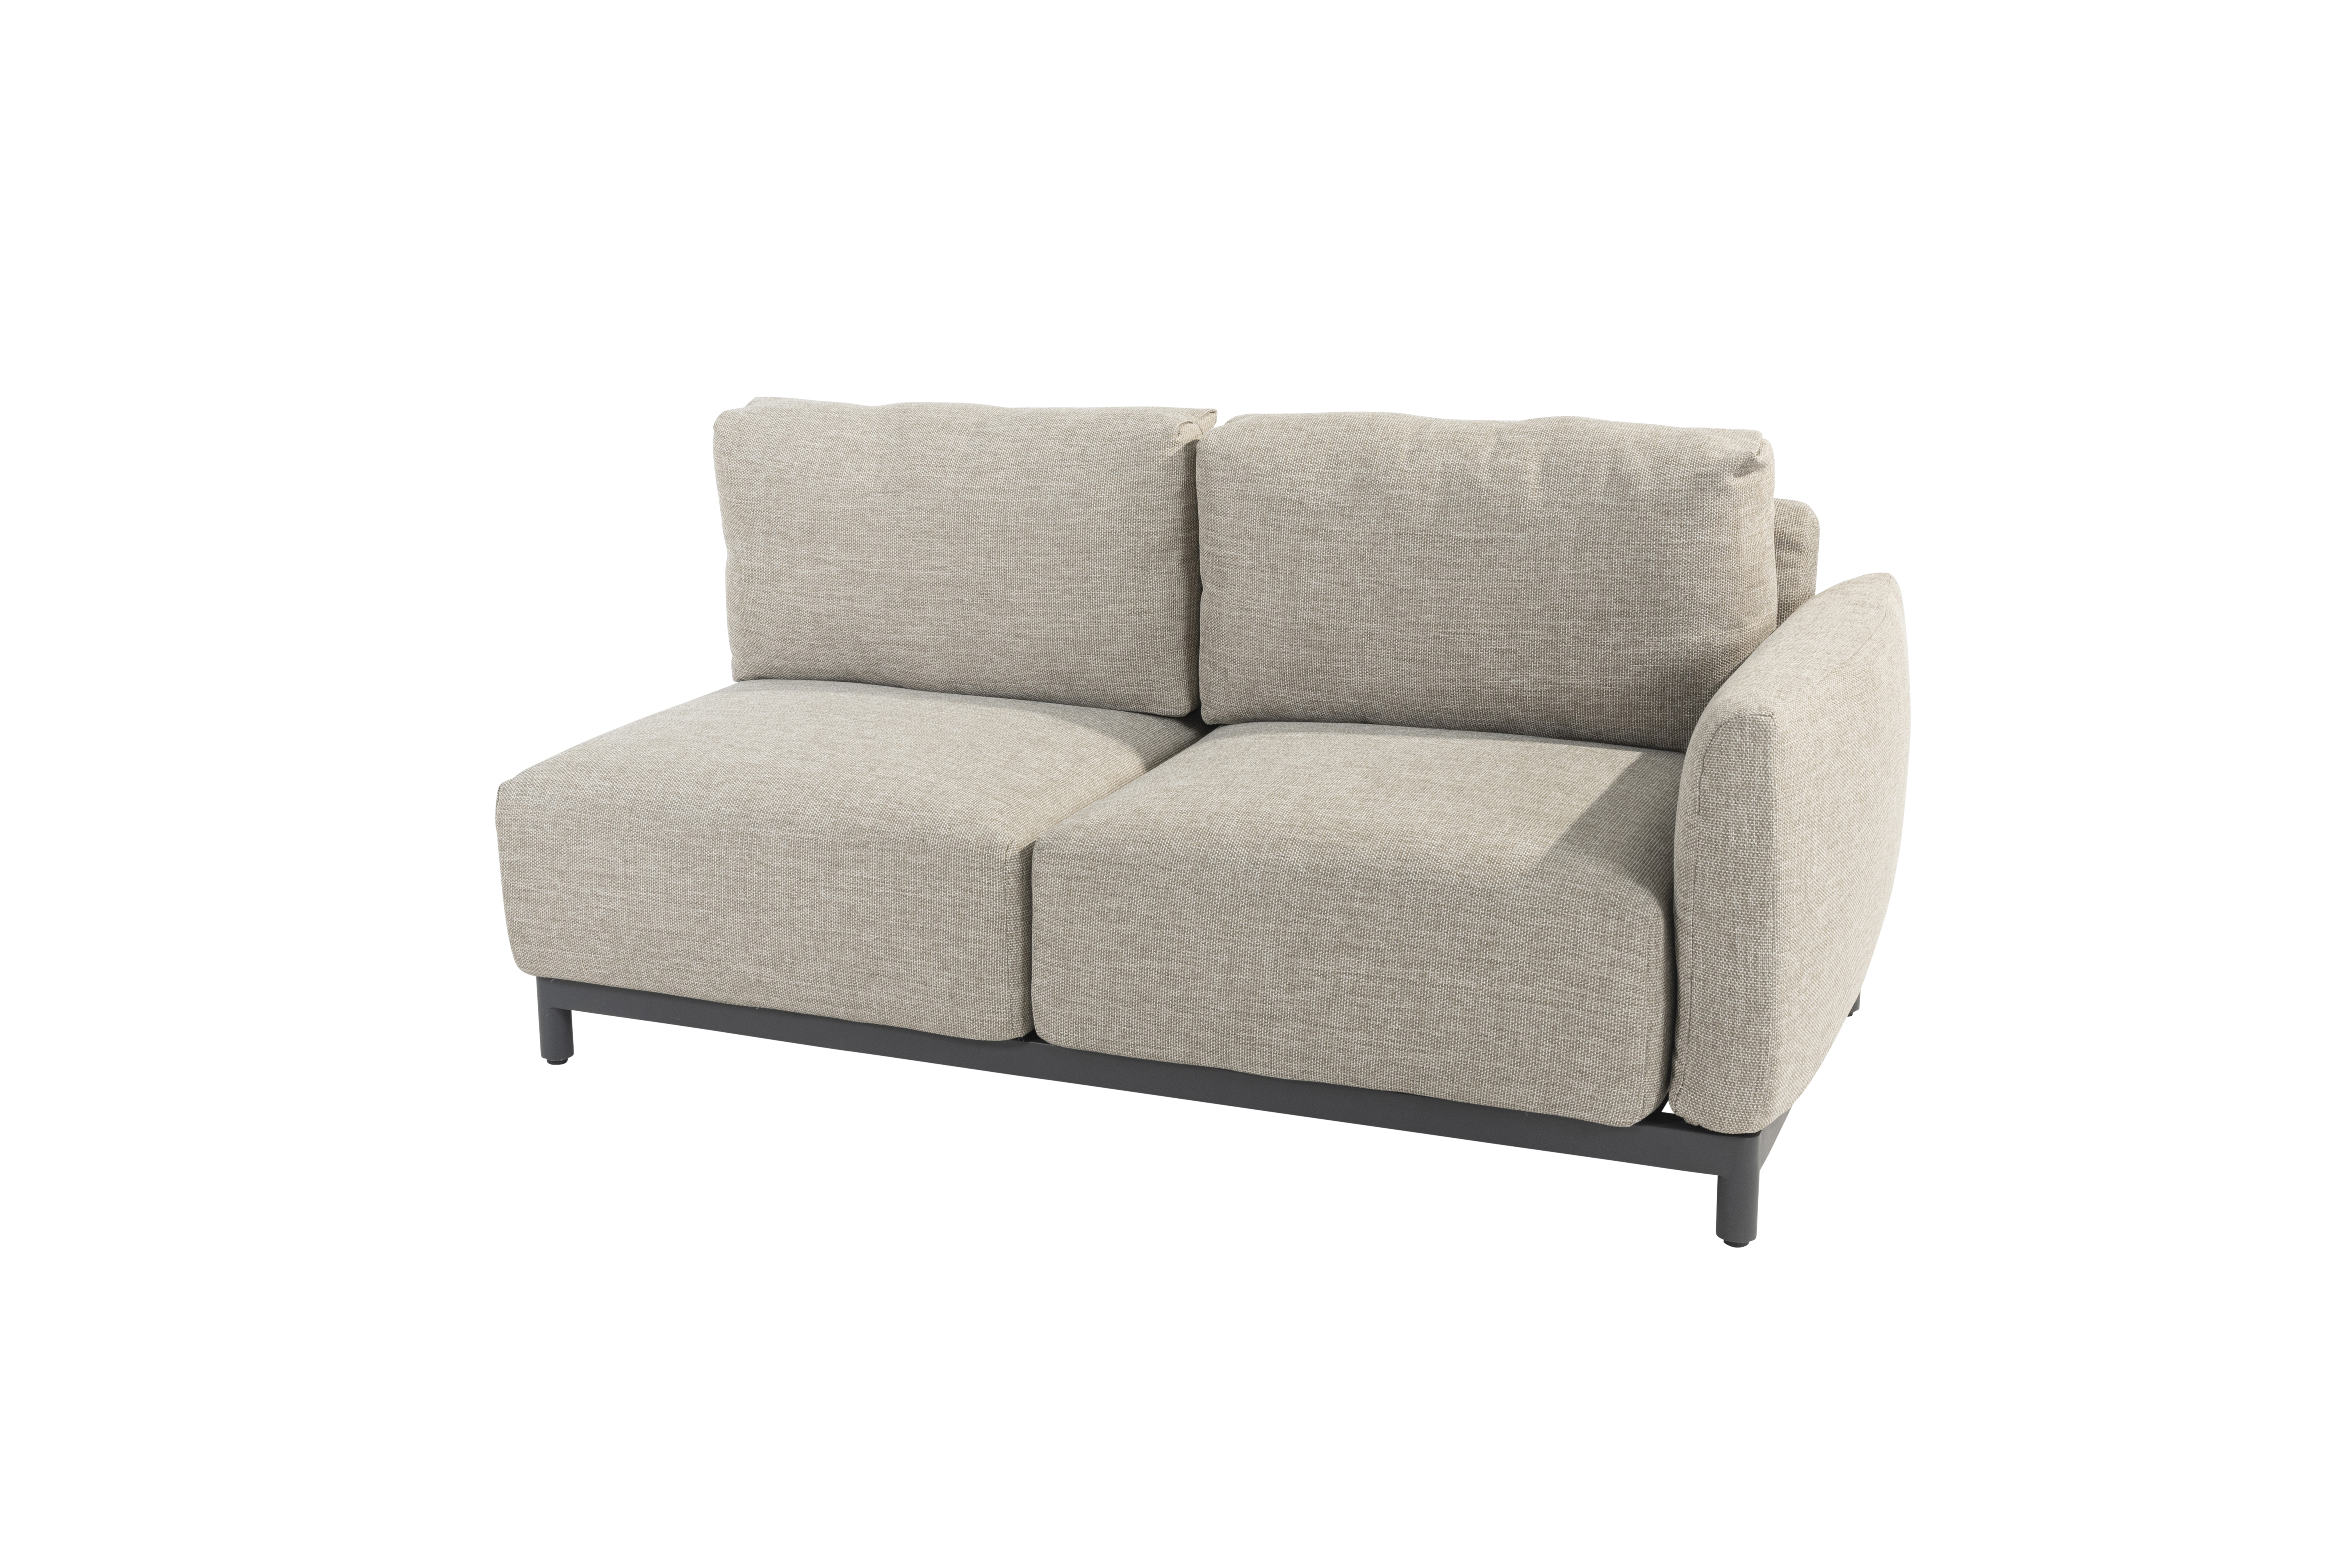 Furore 2 seater bench envelop antracite left or right with 7 cushions 